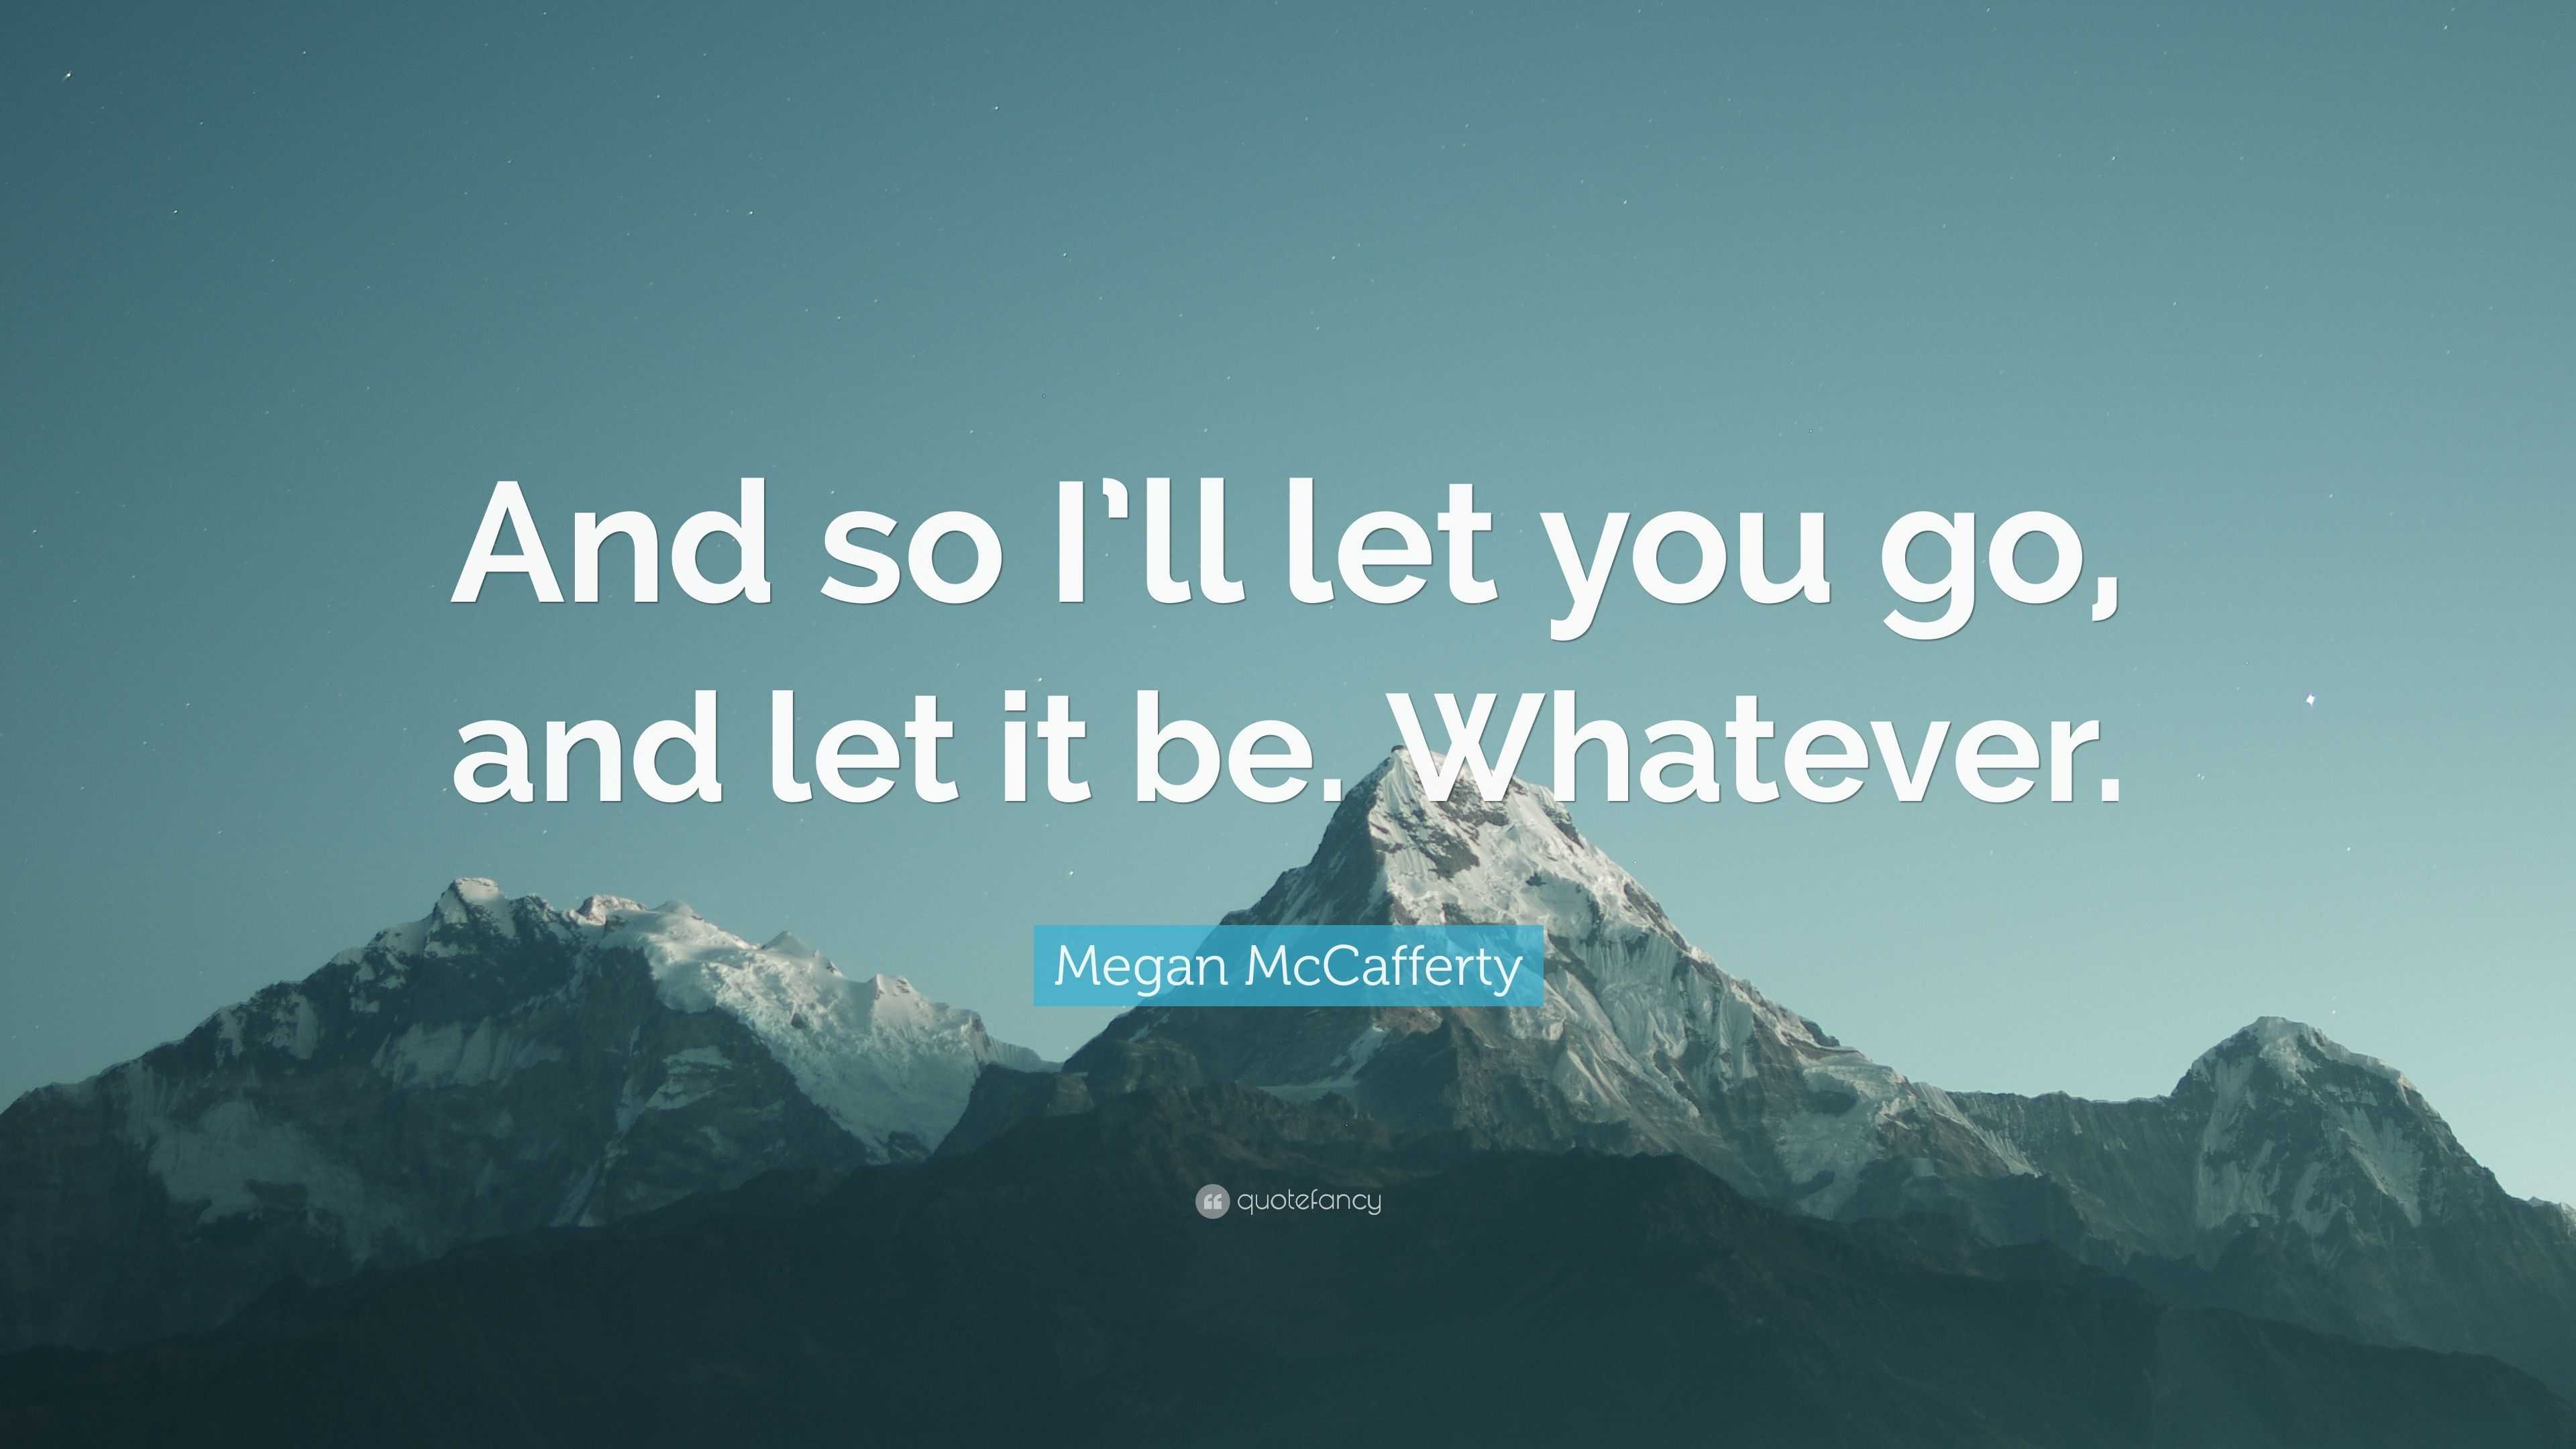 Megan McCafferty Quote: “And so I’ll let you go, and let it be. Whatever.”